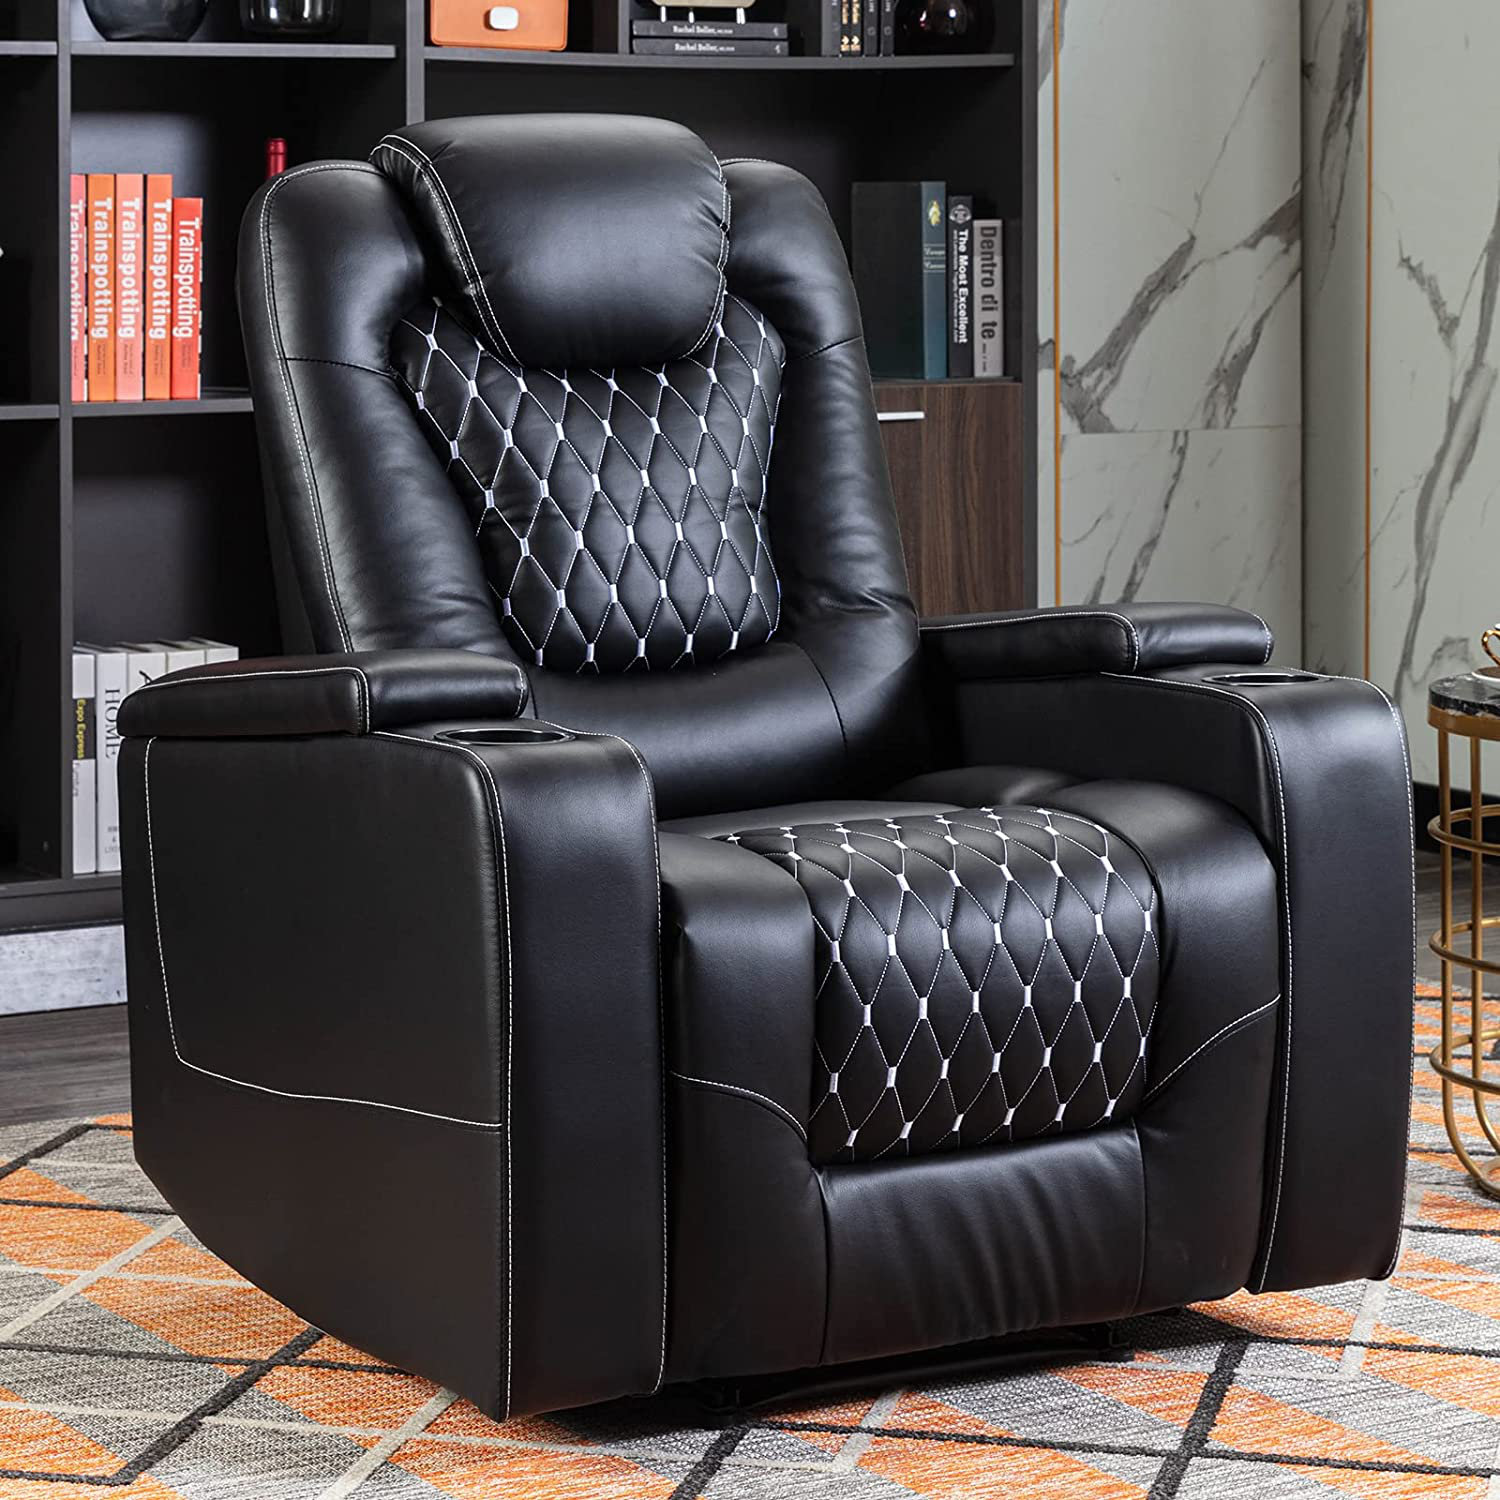 Dropship Set Of Two Wood-Framed PU Leather Recliner Chair Adjustable Home  Theater Seating With Thick Seat Cushion And Backrest Modern Living Room  Recliners; Black to Sell Online at a Lower Price